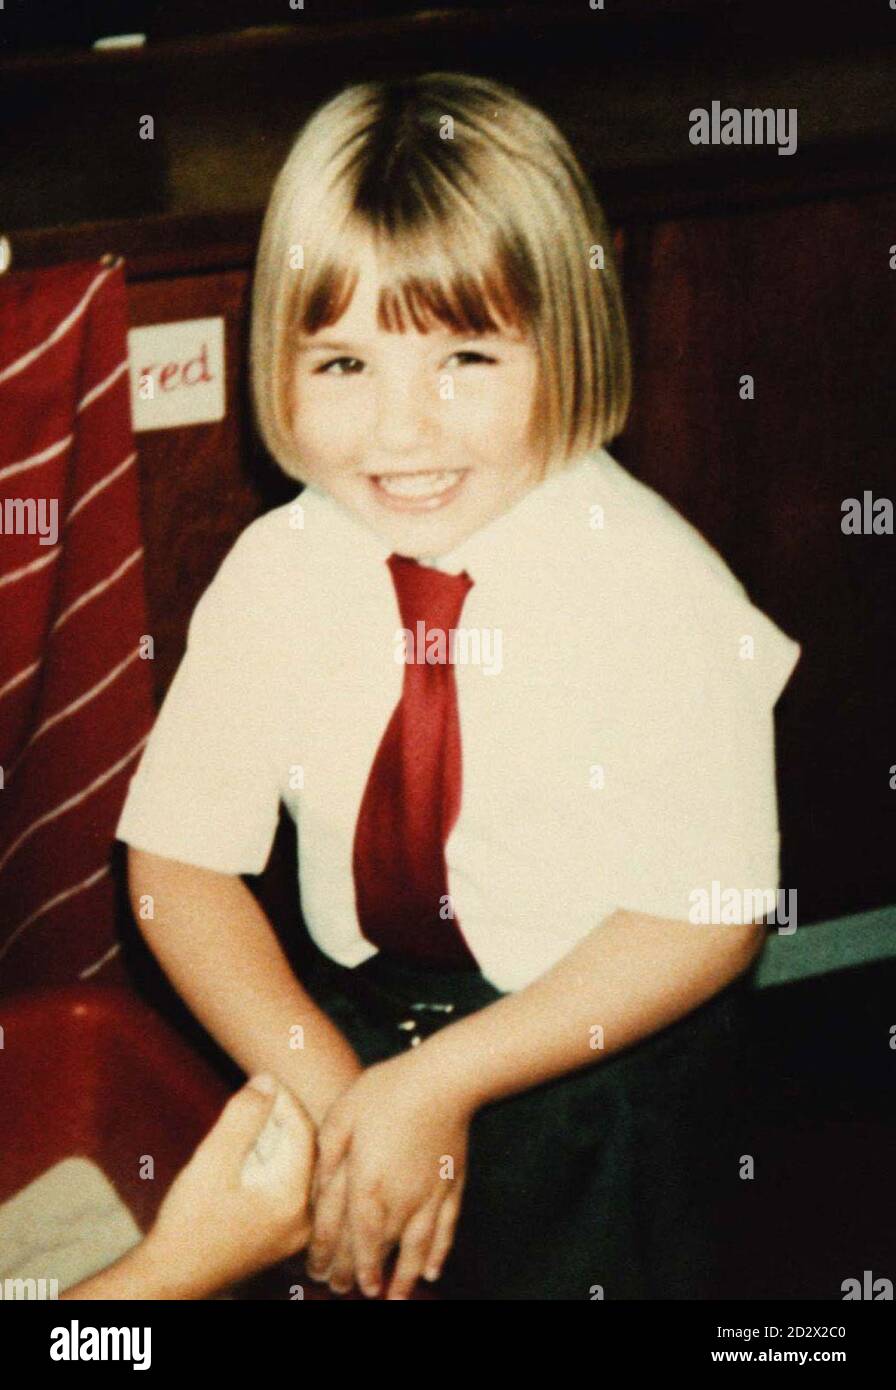 Amy Hutchinson (5) who was shot in the leg at last Wednesday's Dunblane Primary school shootings.   * 12/10/96: Amy's parents reacted furiously to the school project set for her in which she was asked to colour in a picture of a gun. Stirling District Council fully apologised for the worksheet. Stock Photo